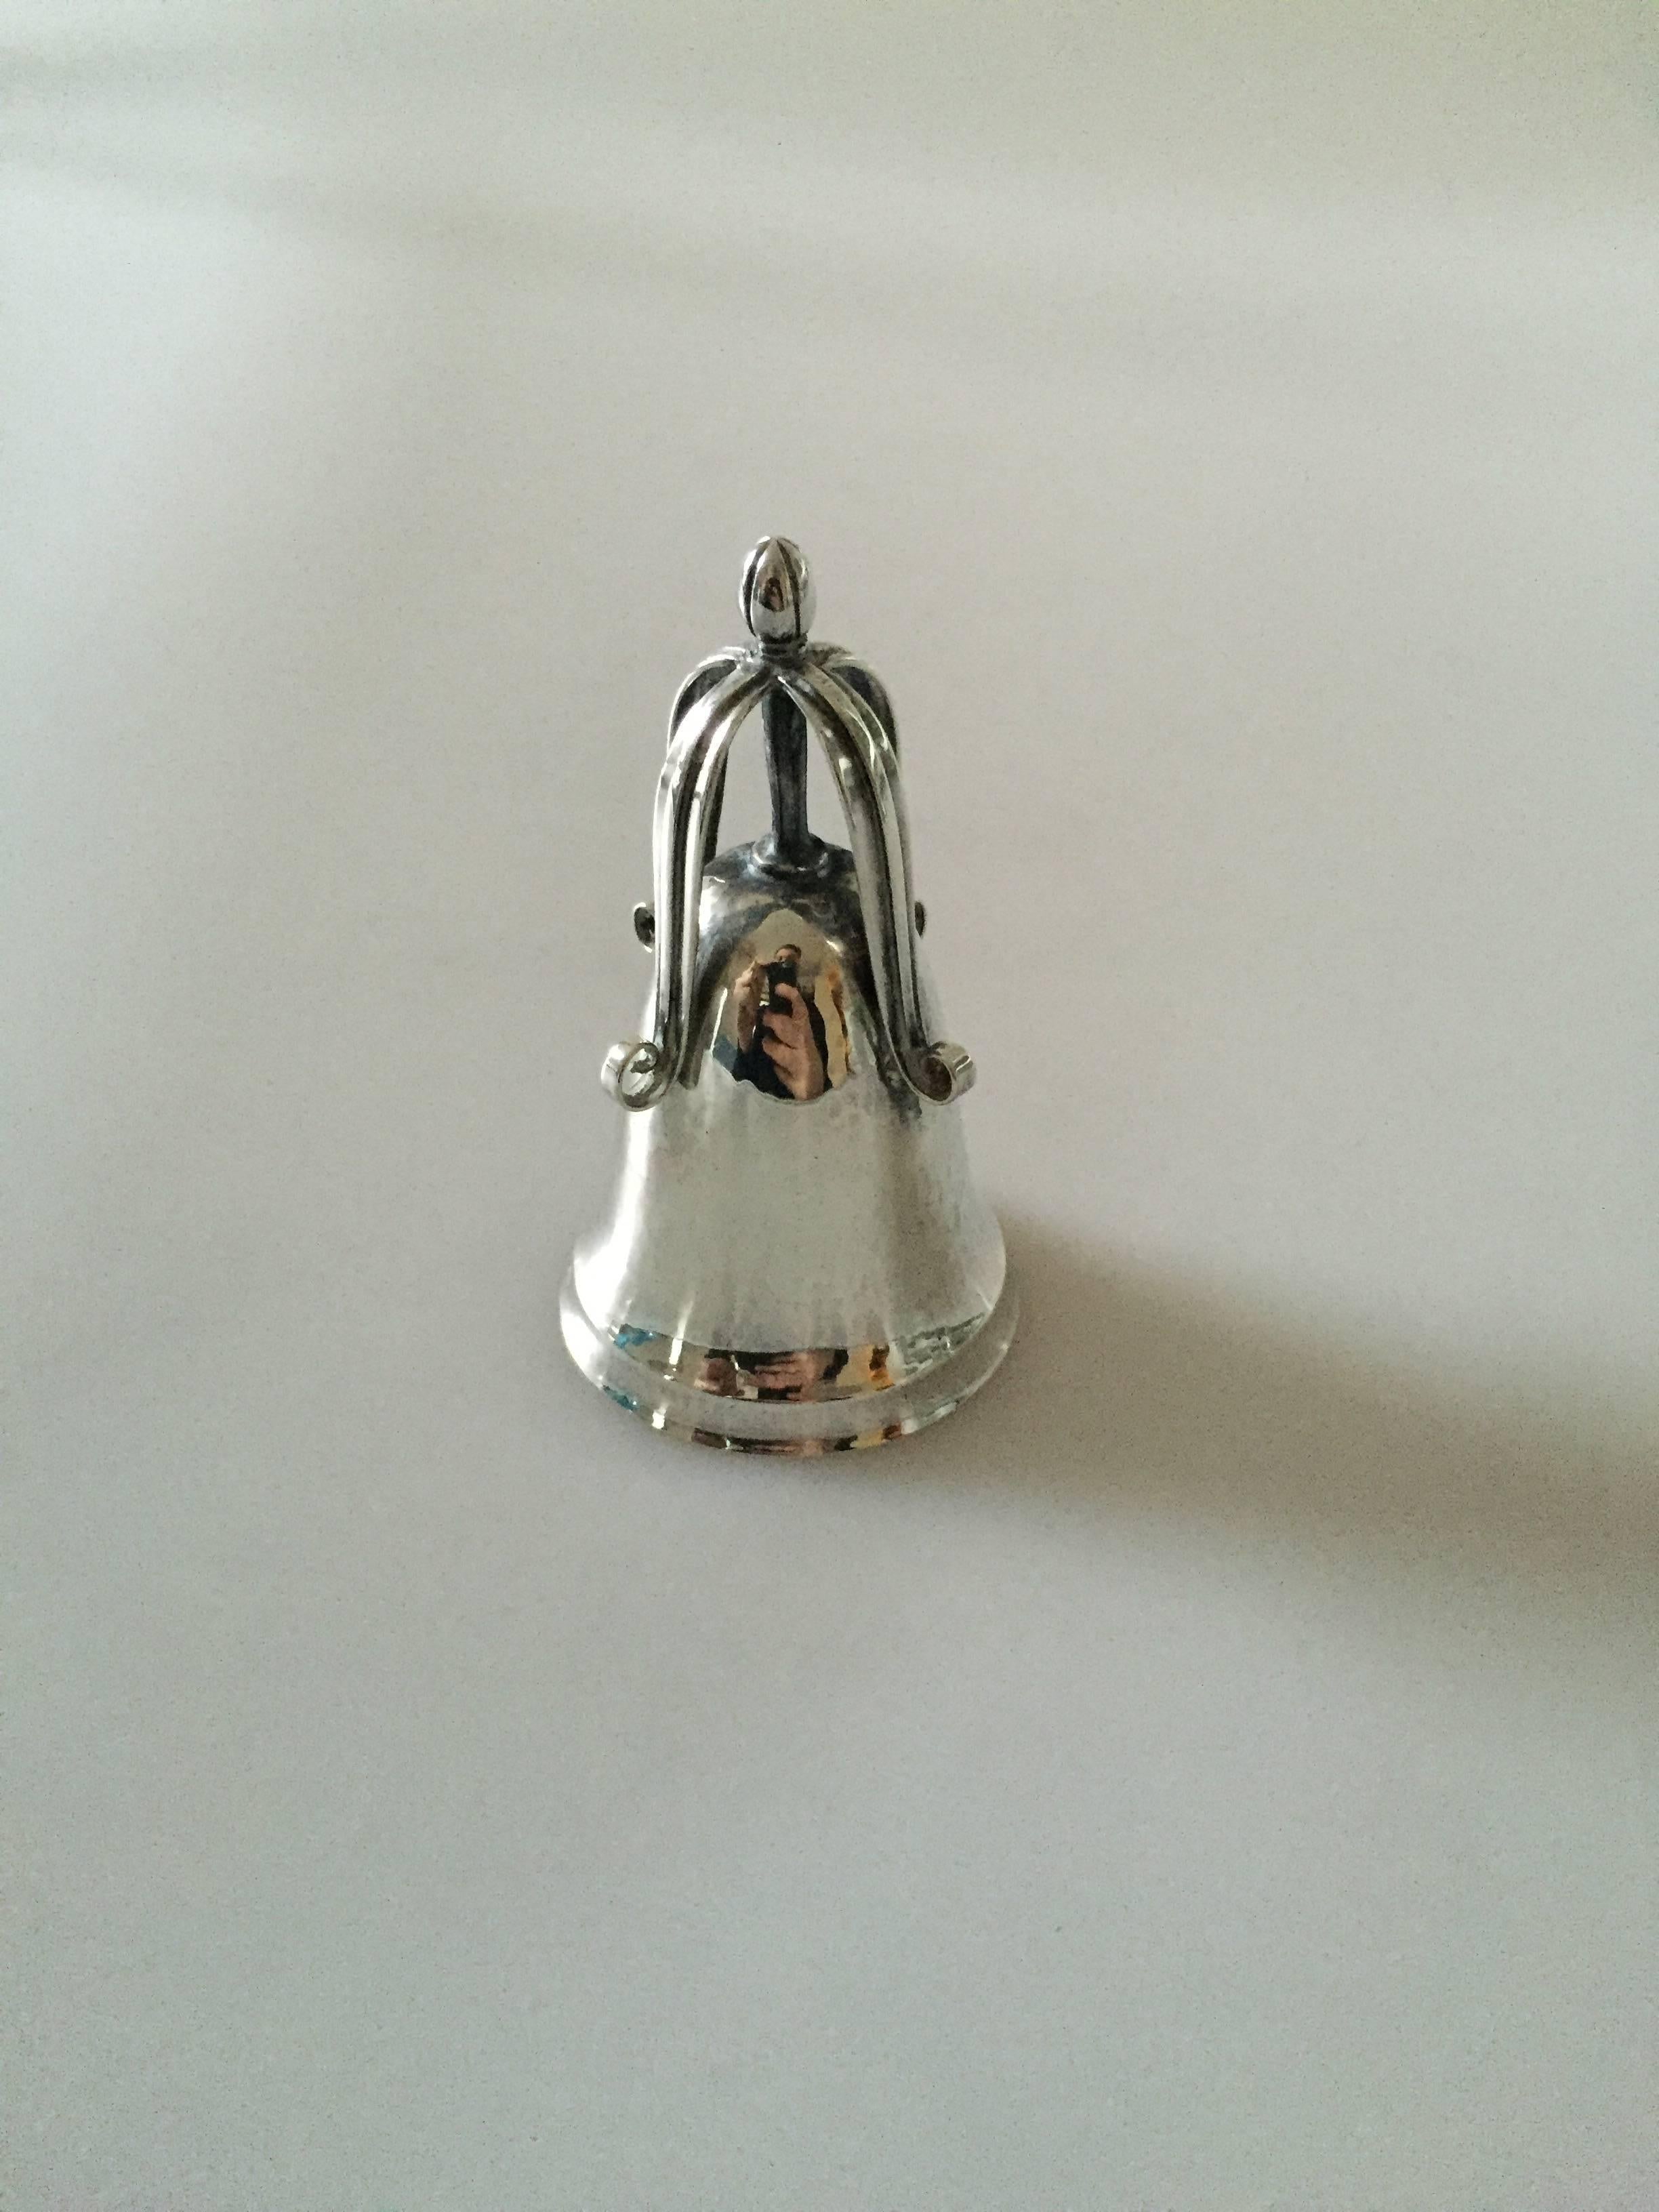 Georg Jensen sterling silver table bell #80. With old marks.

Measures: 8.3 cm H, 4.9 cm in dia.